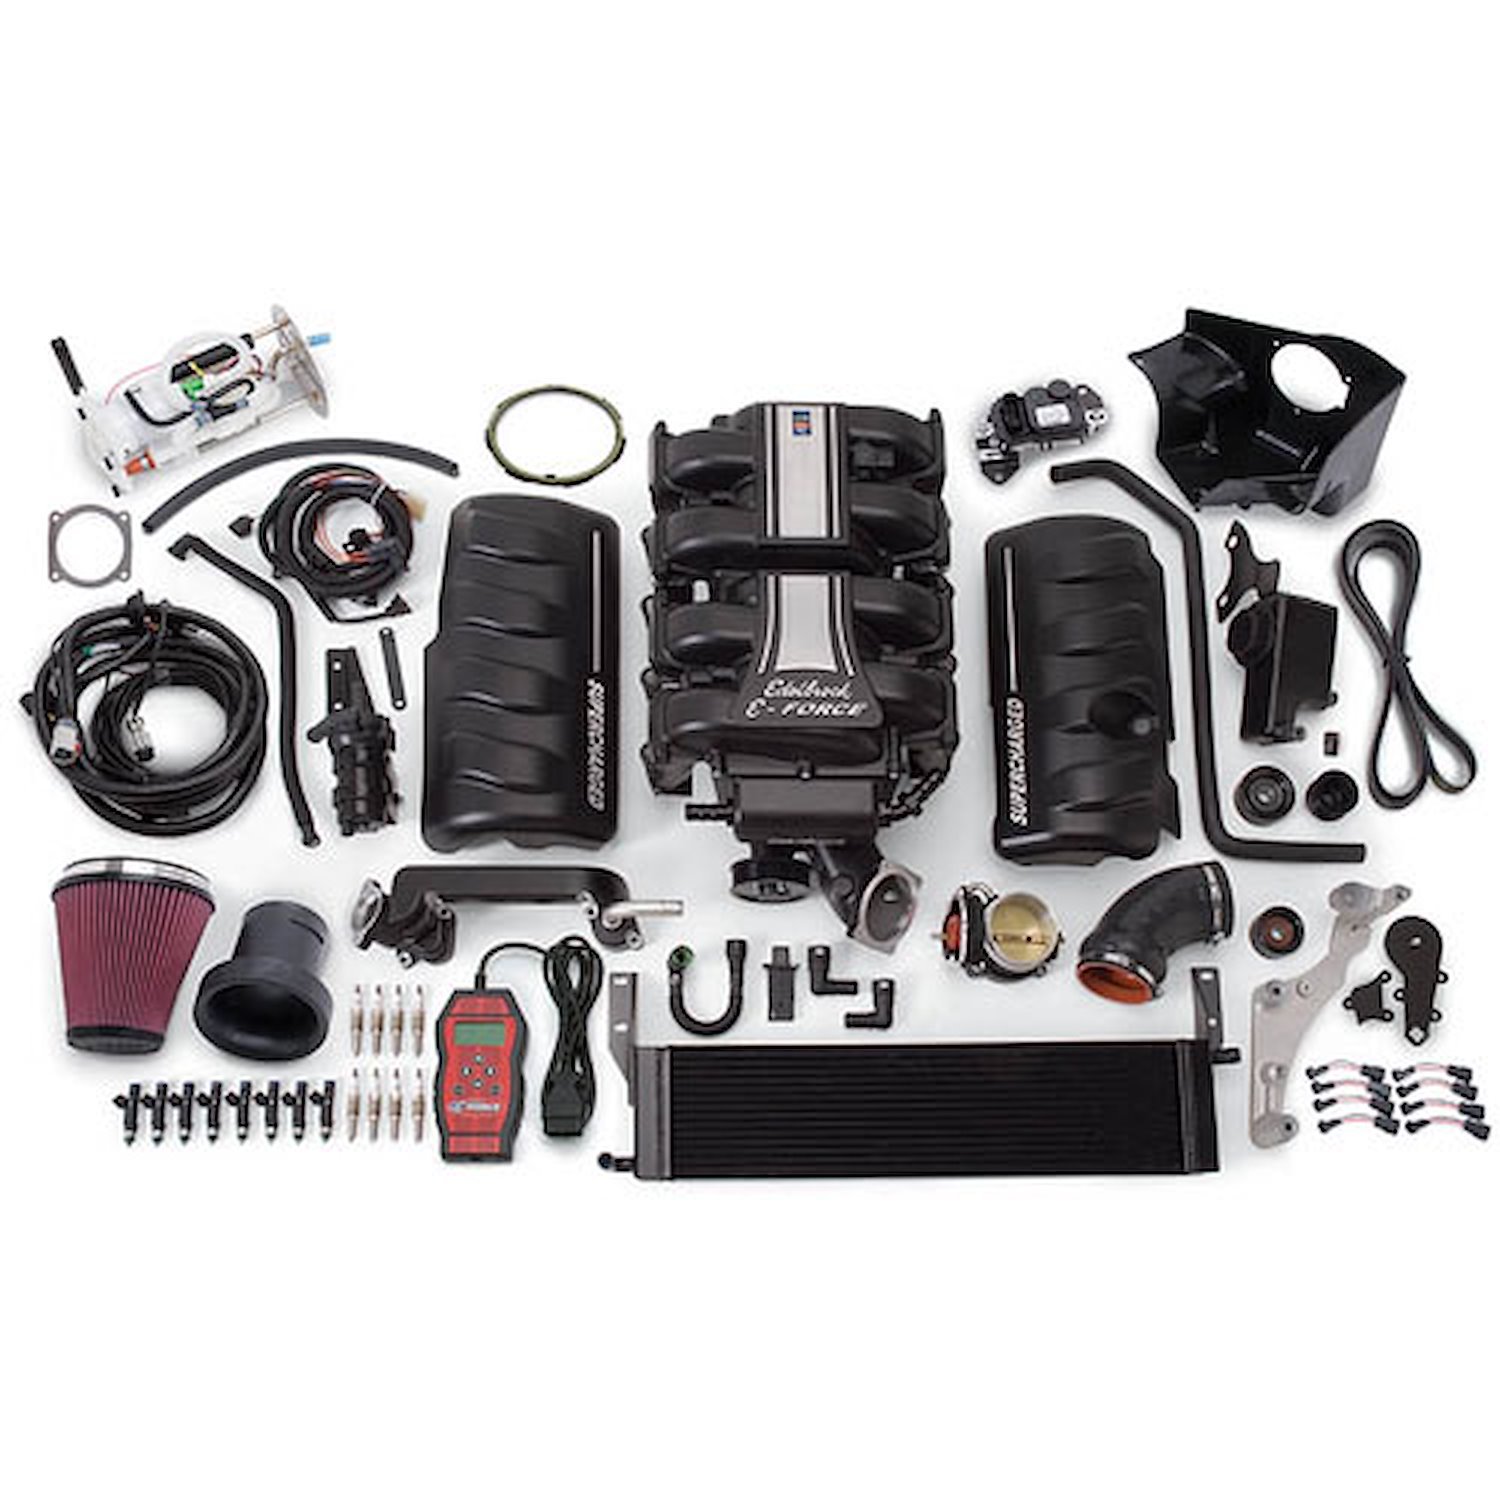 E-Force Stage 2 Track System Supercharger Kit for